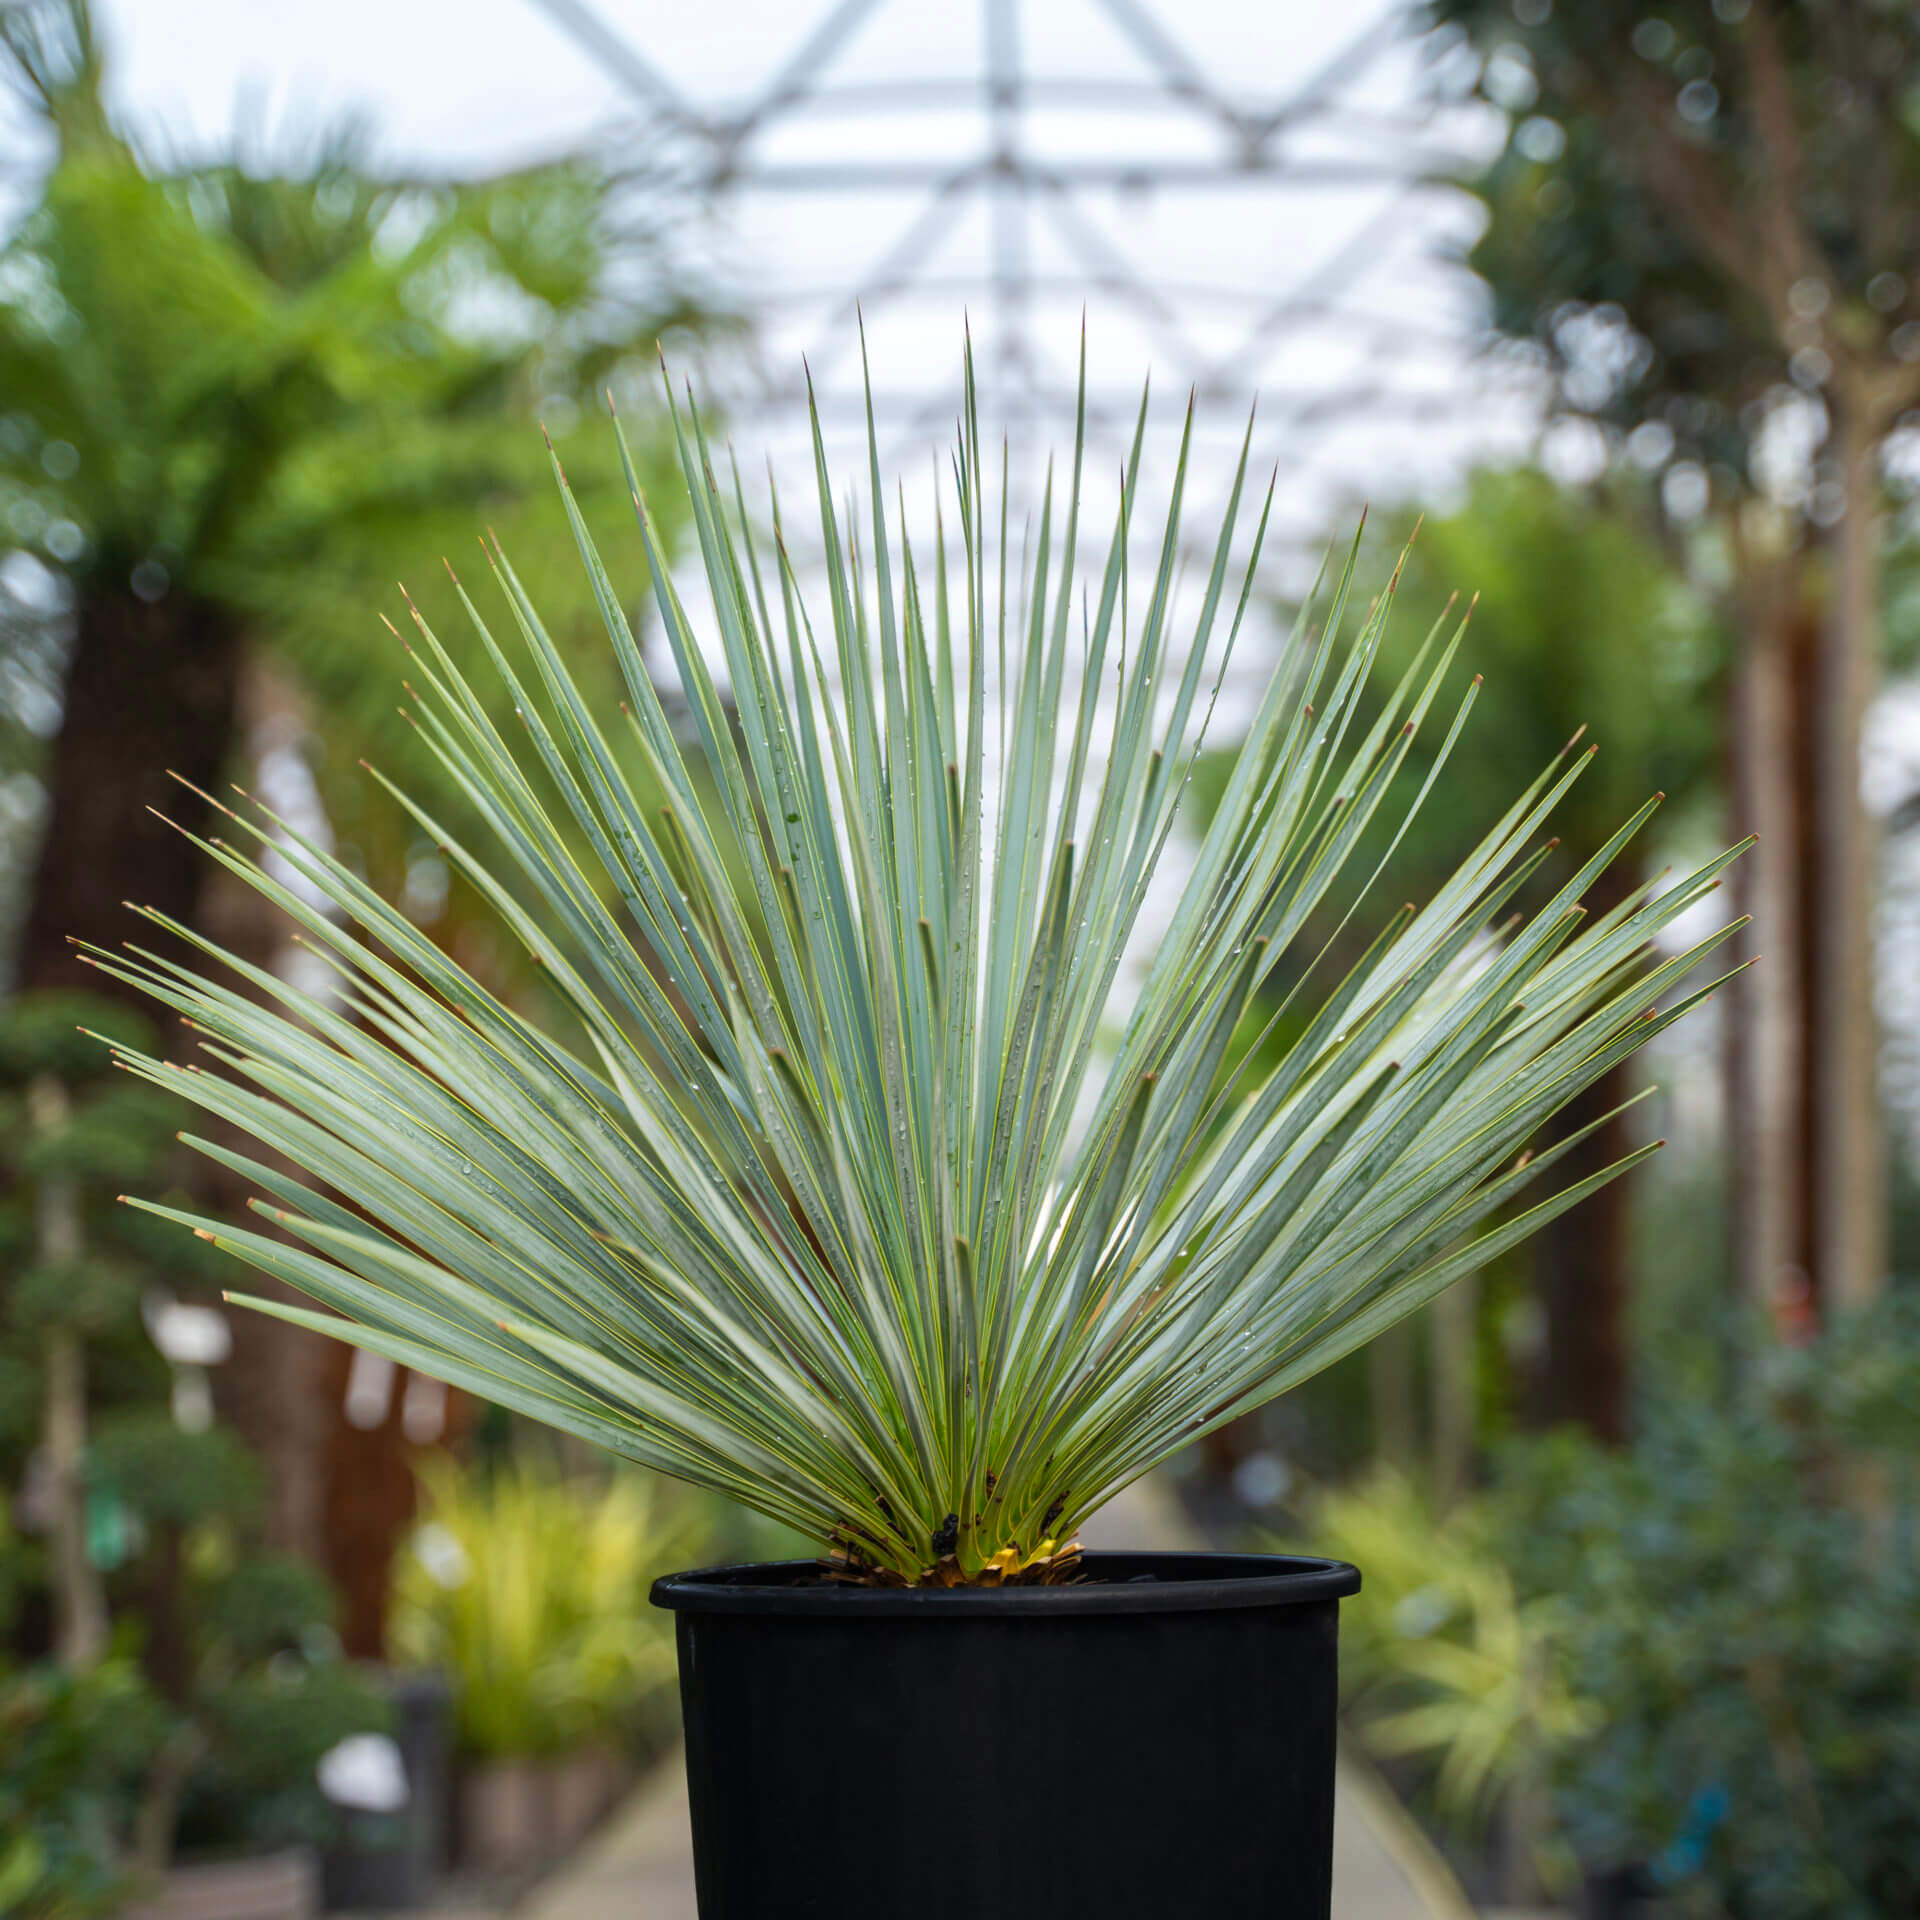 A Beaked Yucca plant in a pot.